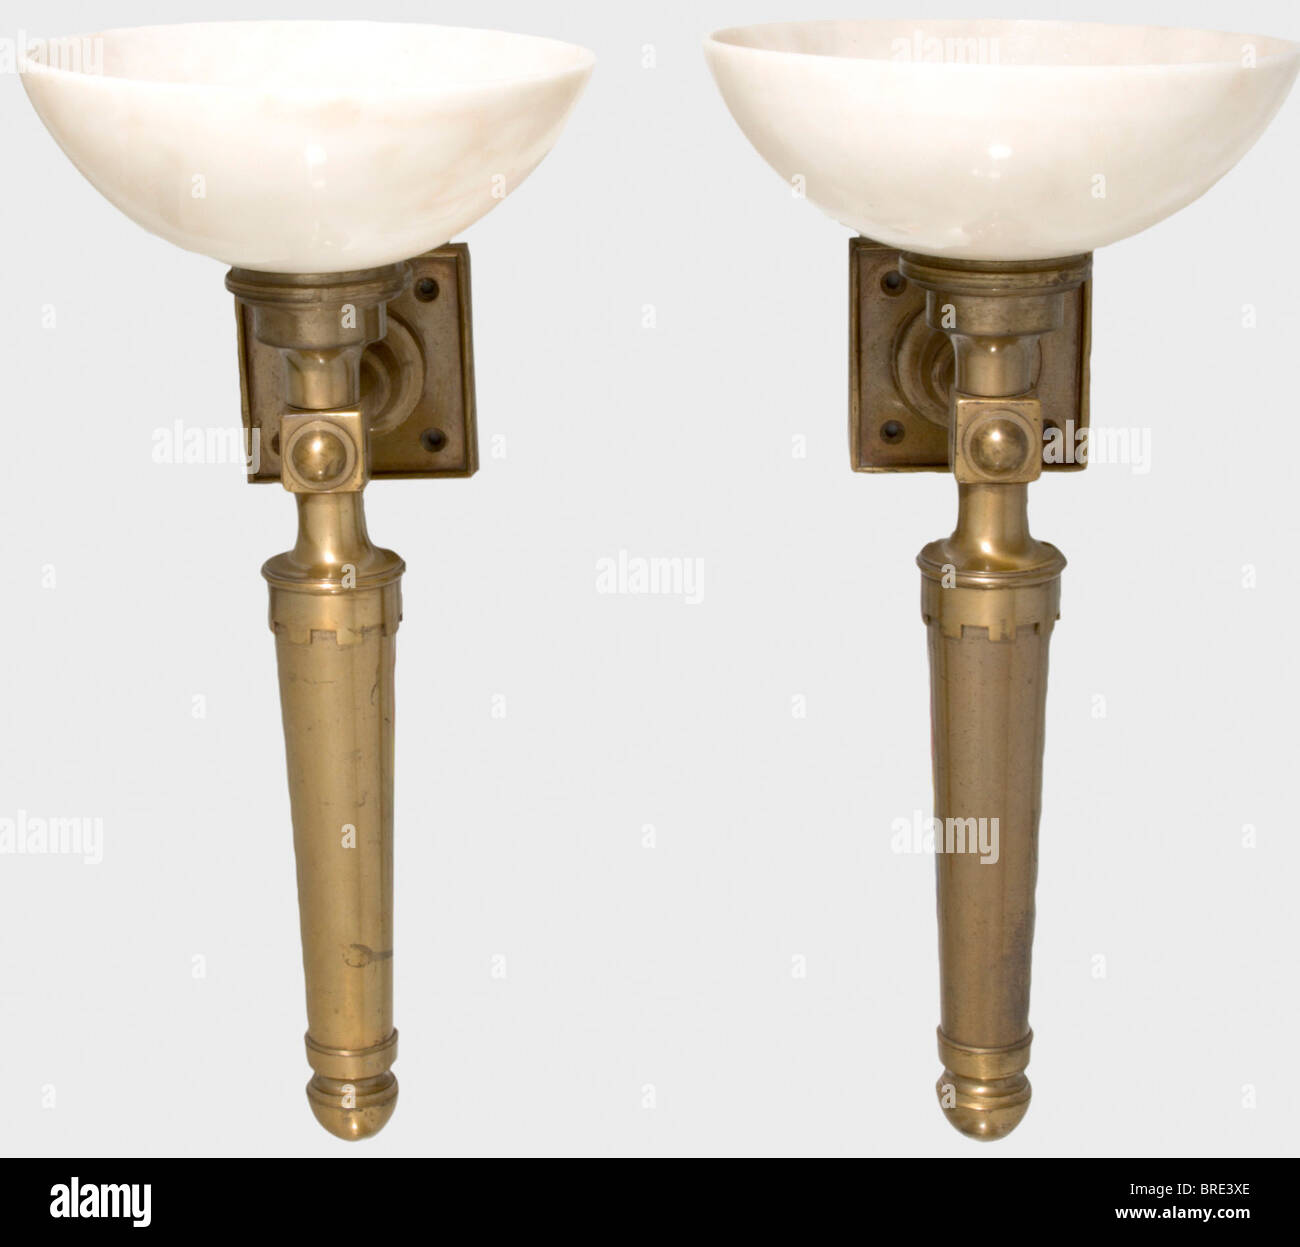 Adolf Hitler, two wall candelabra from the drawing room in the Führerhaus in Munich Created and designed by Professor Leonhard Gall and Prof. Gerdy Troost. Brass, with gold-coloured electroplating. The lampshades are made of figured, light marble. The wiring has been replaced. Hitler had the original fabric lampshades replaced by the marble shades for their effect, as in the large reception hall and in the dinning room. Height: 53 cm. The Führerhaus and NSDAP administration building were built on the Königplatz in Munich from plans by the Munich architect Paul , Stock Photo